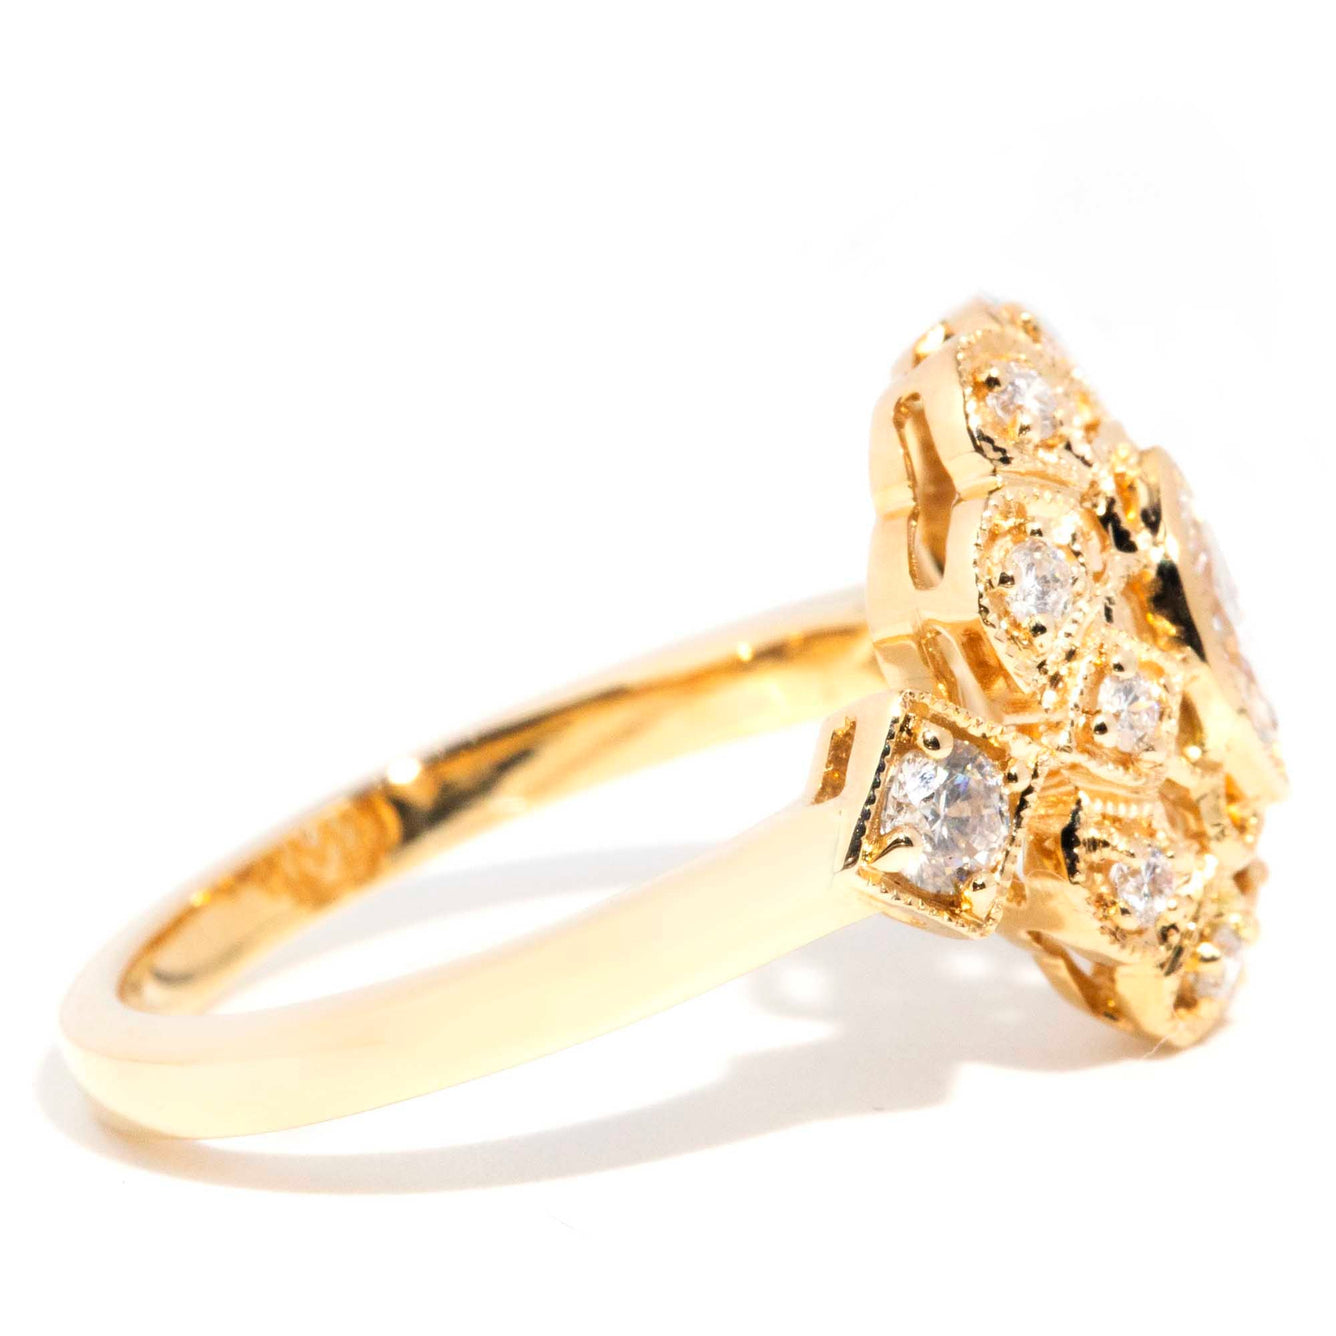 Hillary ADGL Certified 0.57 Carat Diamond 18ct Gold Cluster Ring* OB Rings Imperial Jewellery 